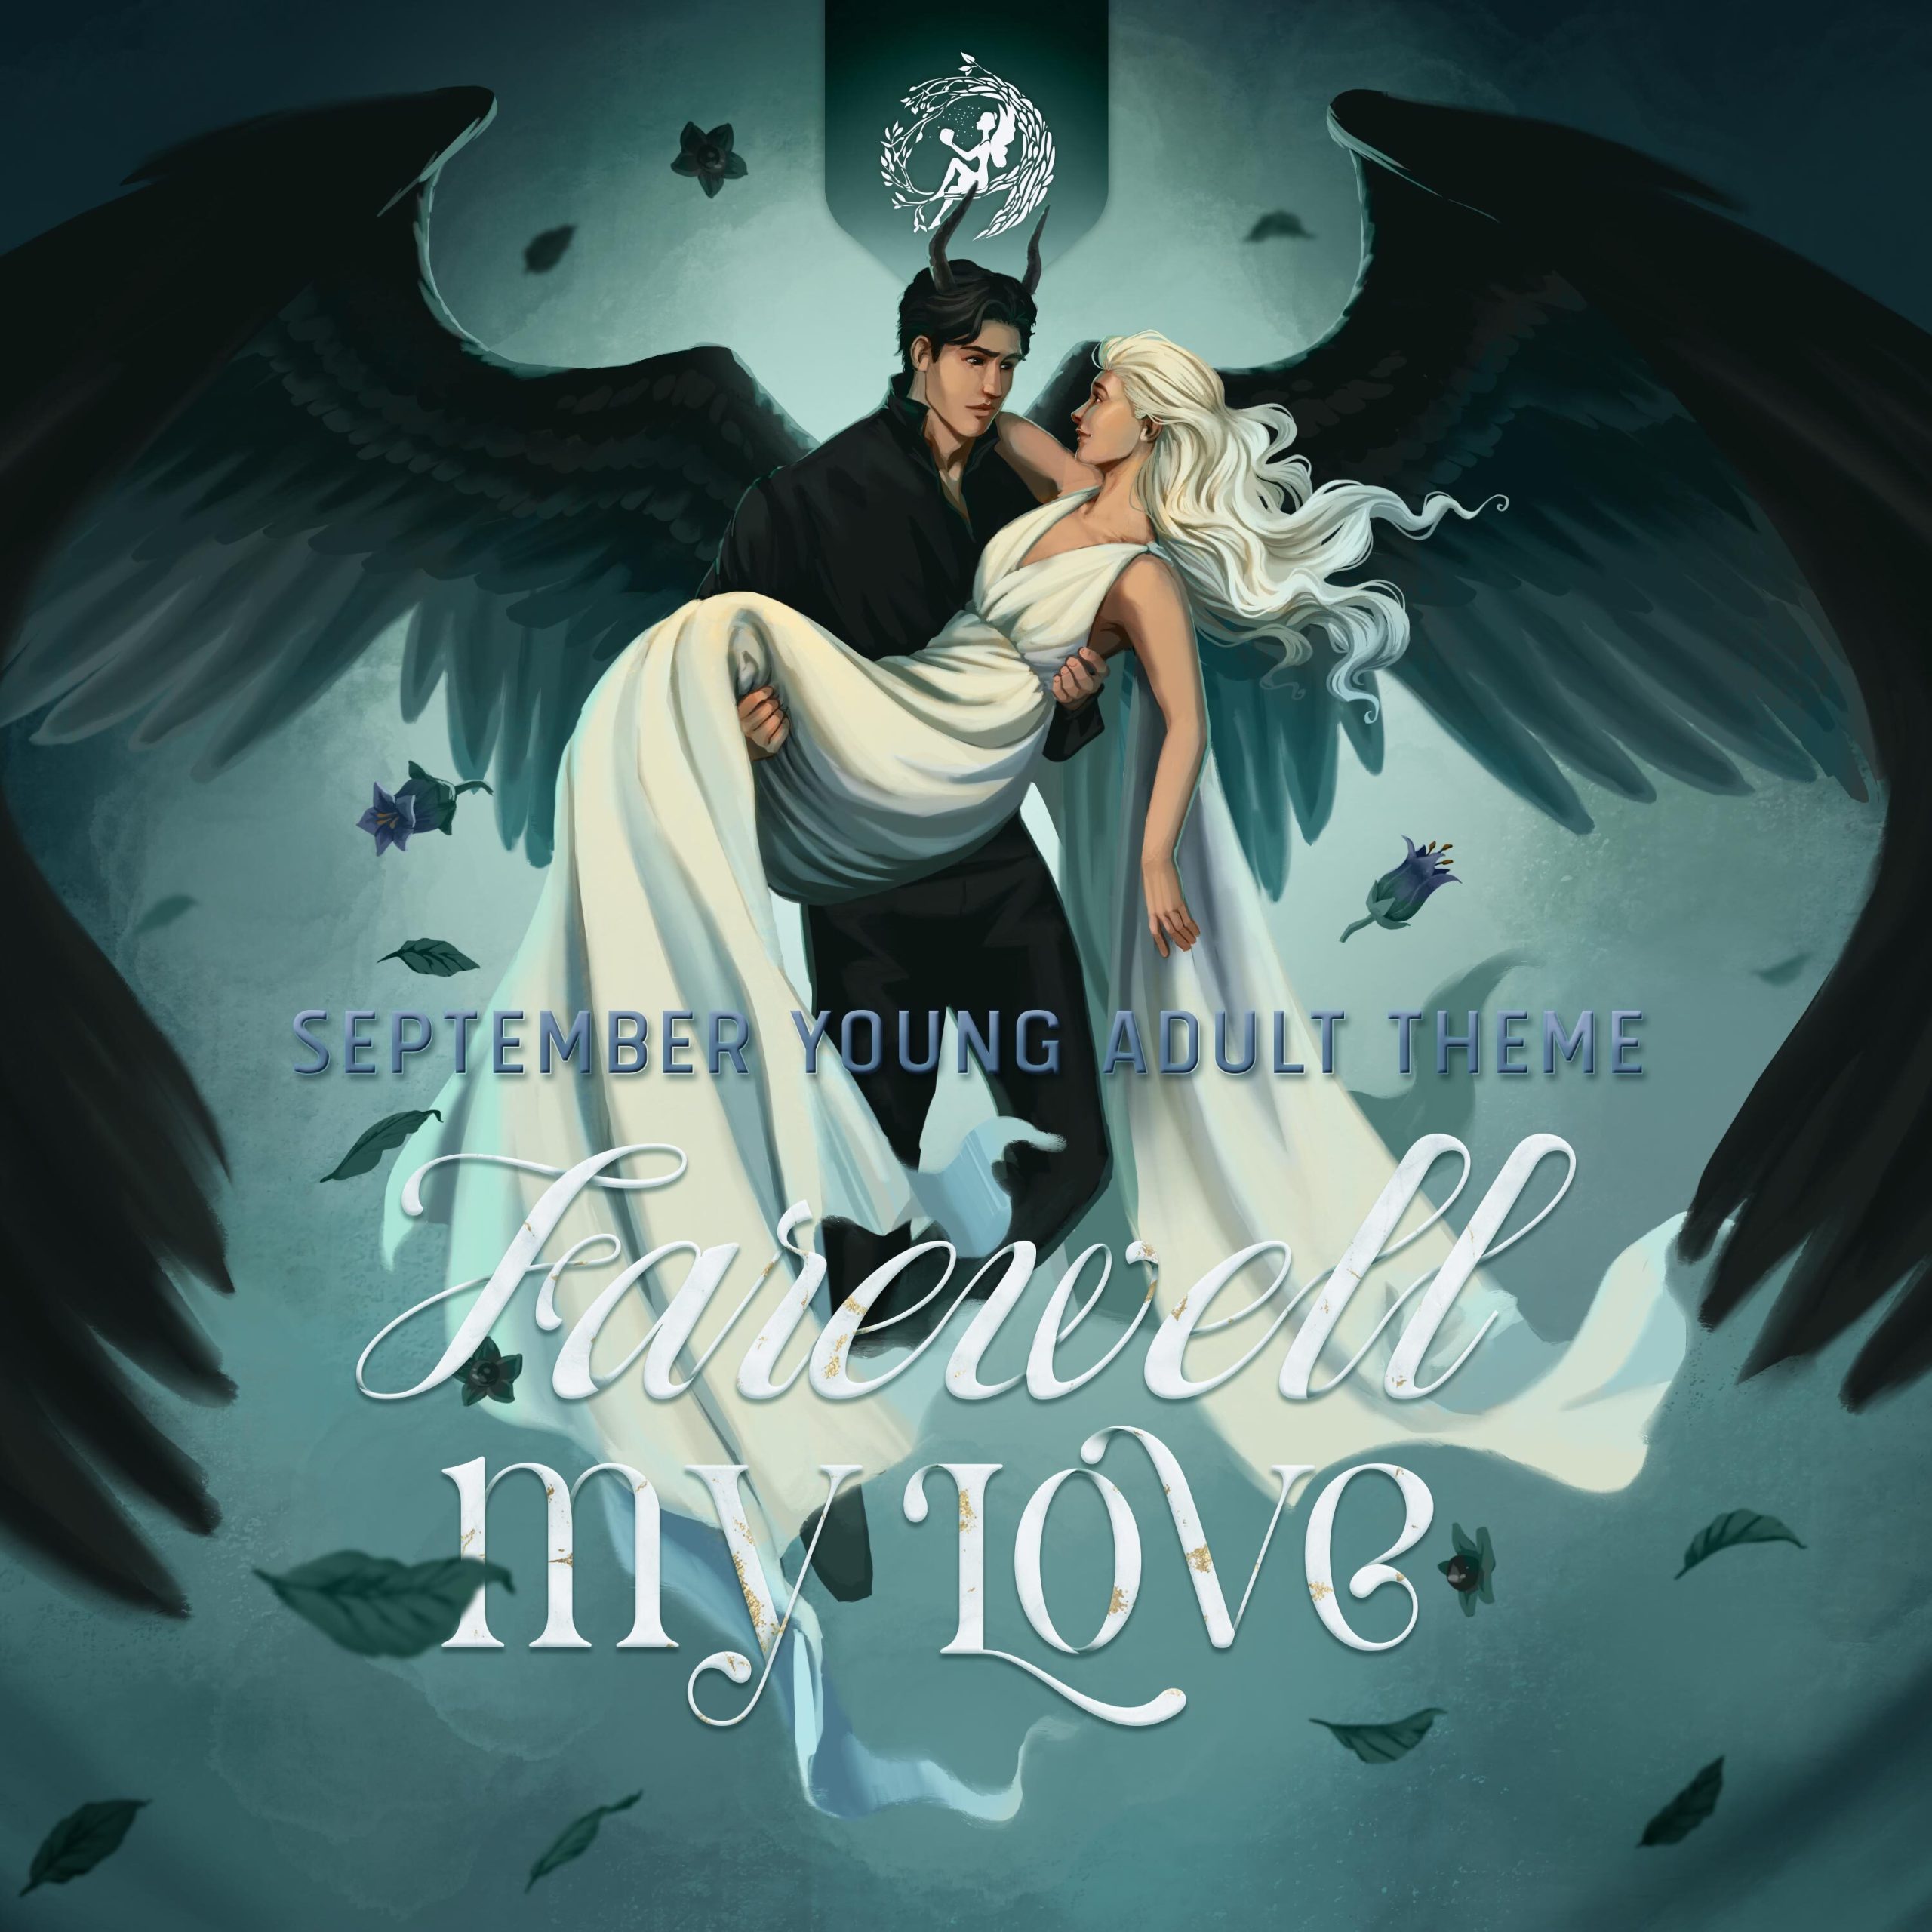 September Young Adult Theme: FAREWELL MY LOVE